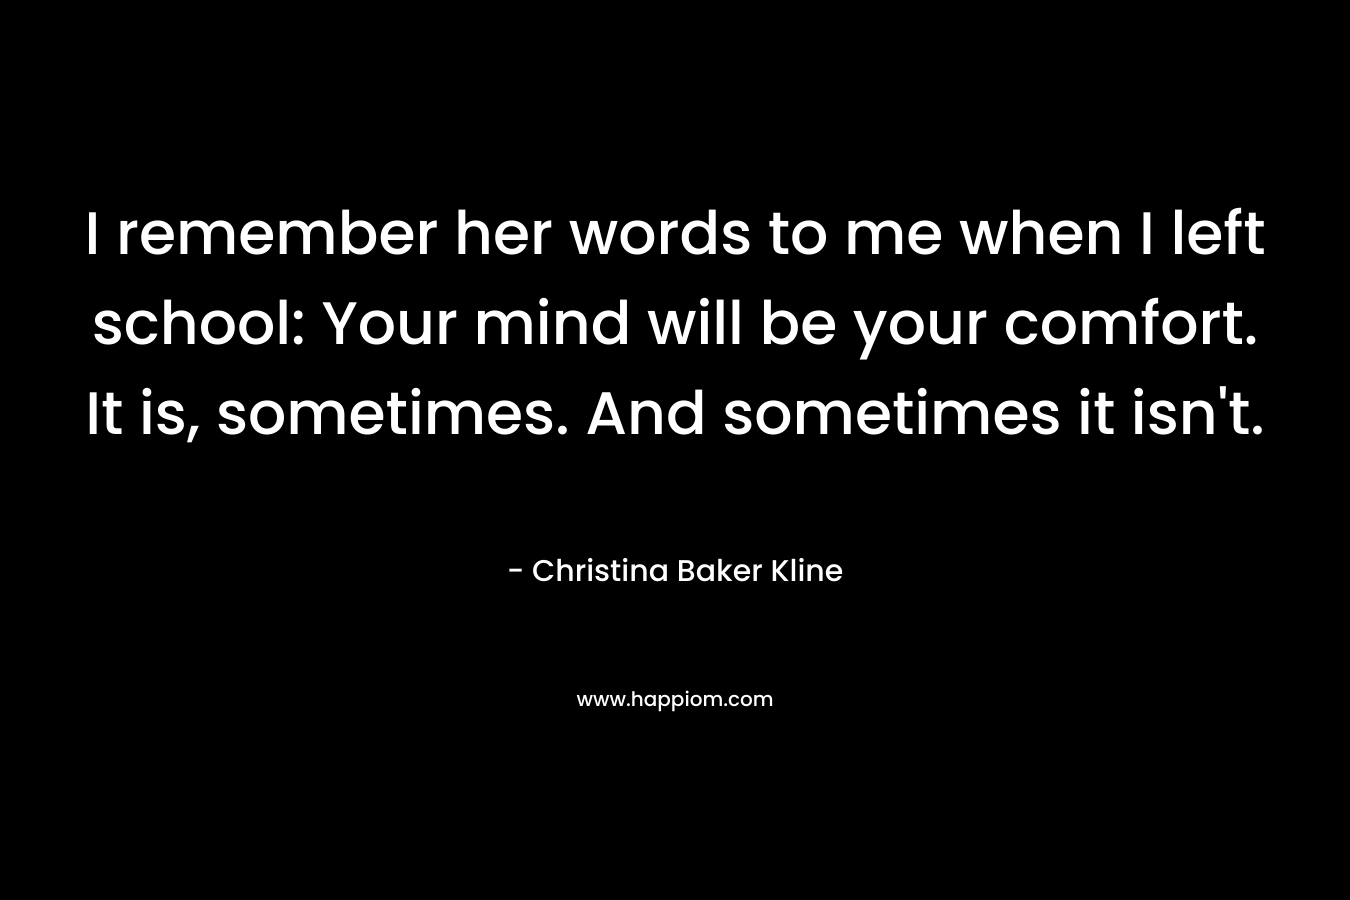 I remember her words to me when I left school: Your mind will be your comfort. It is, sometimes. And sometimes it isn’t. – Christina Baker Kline